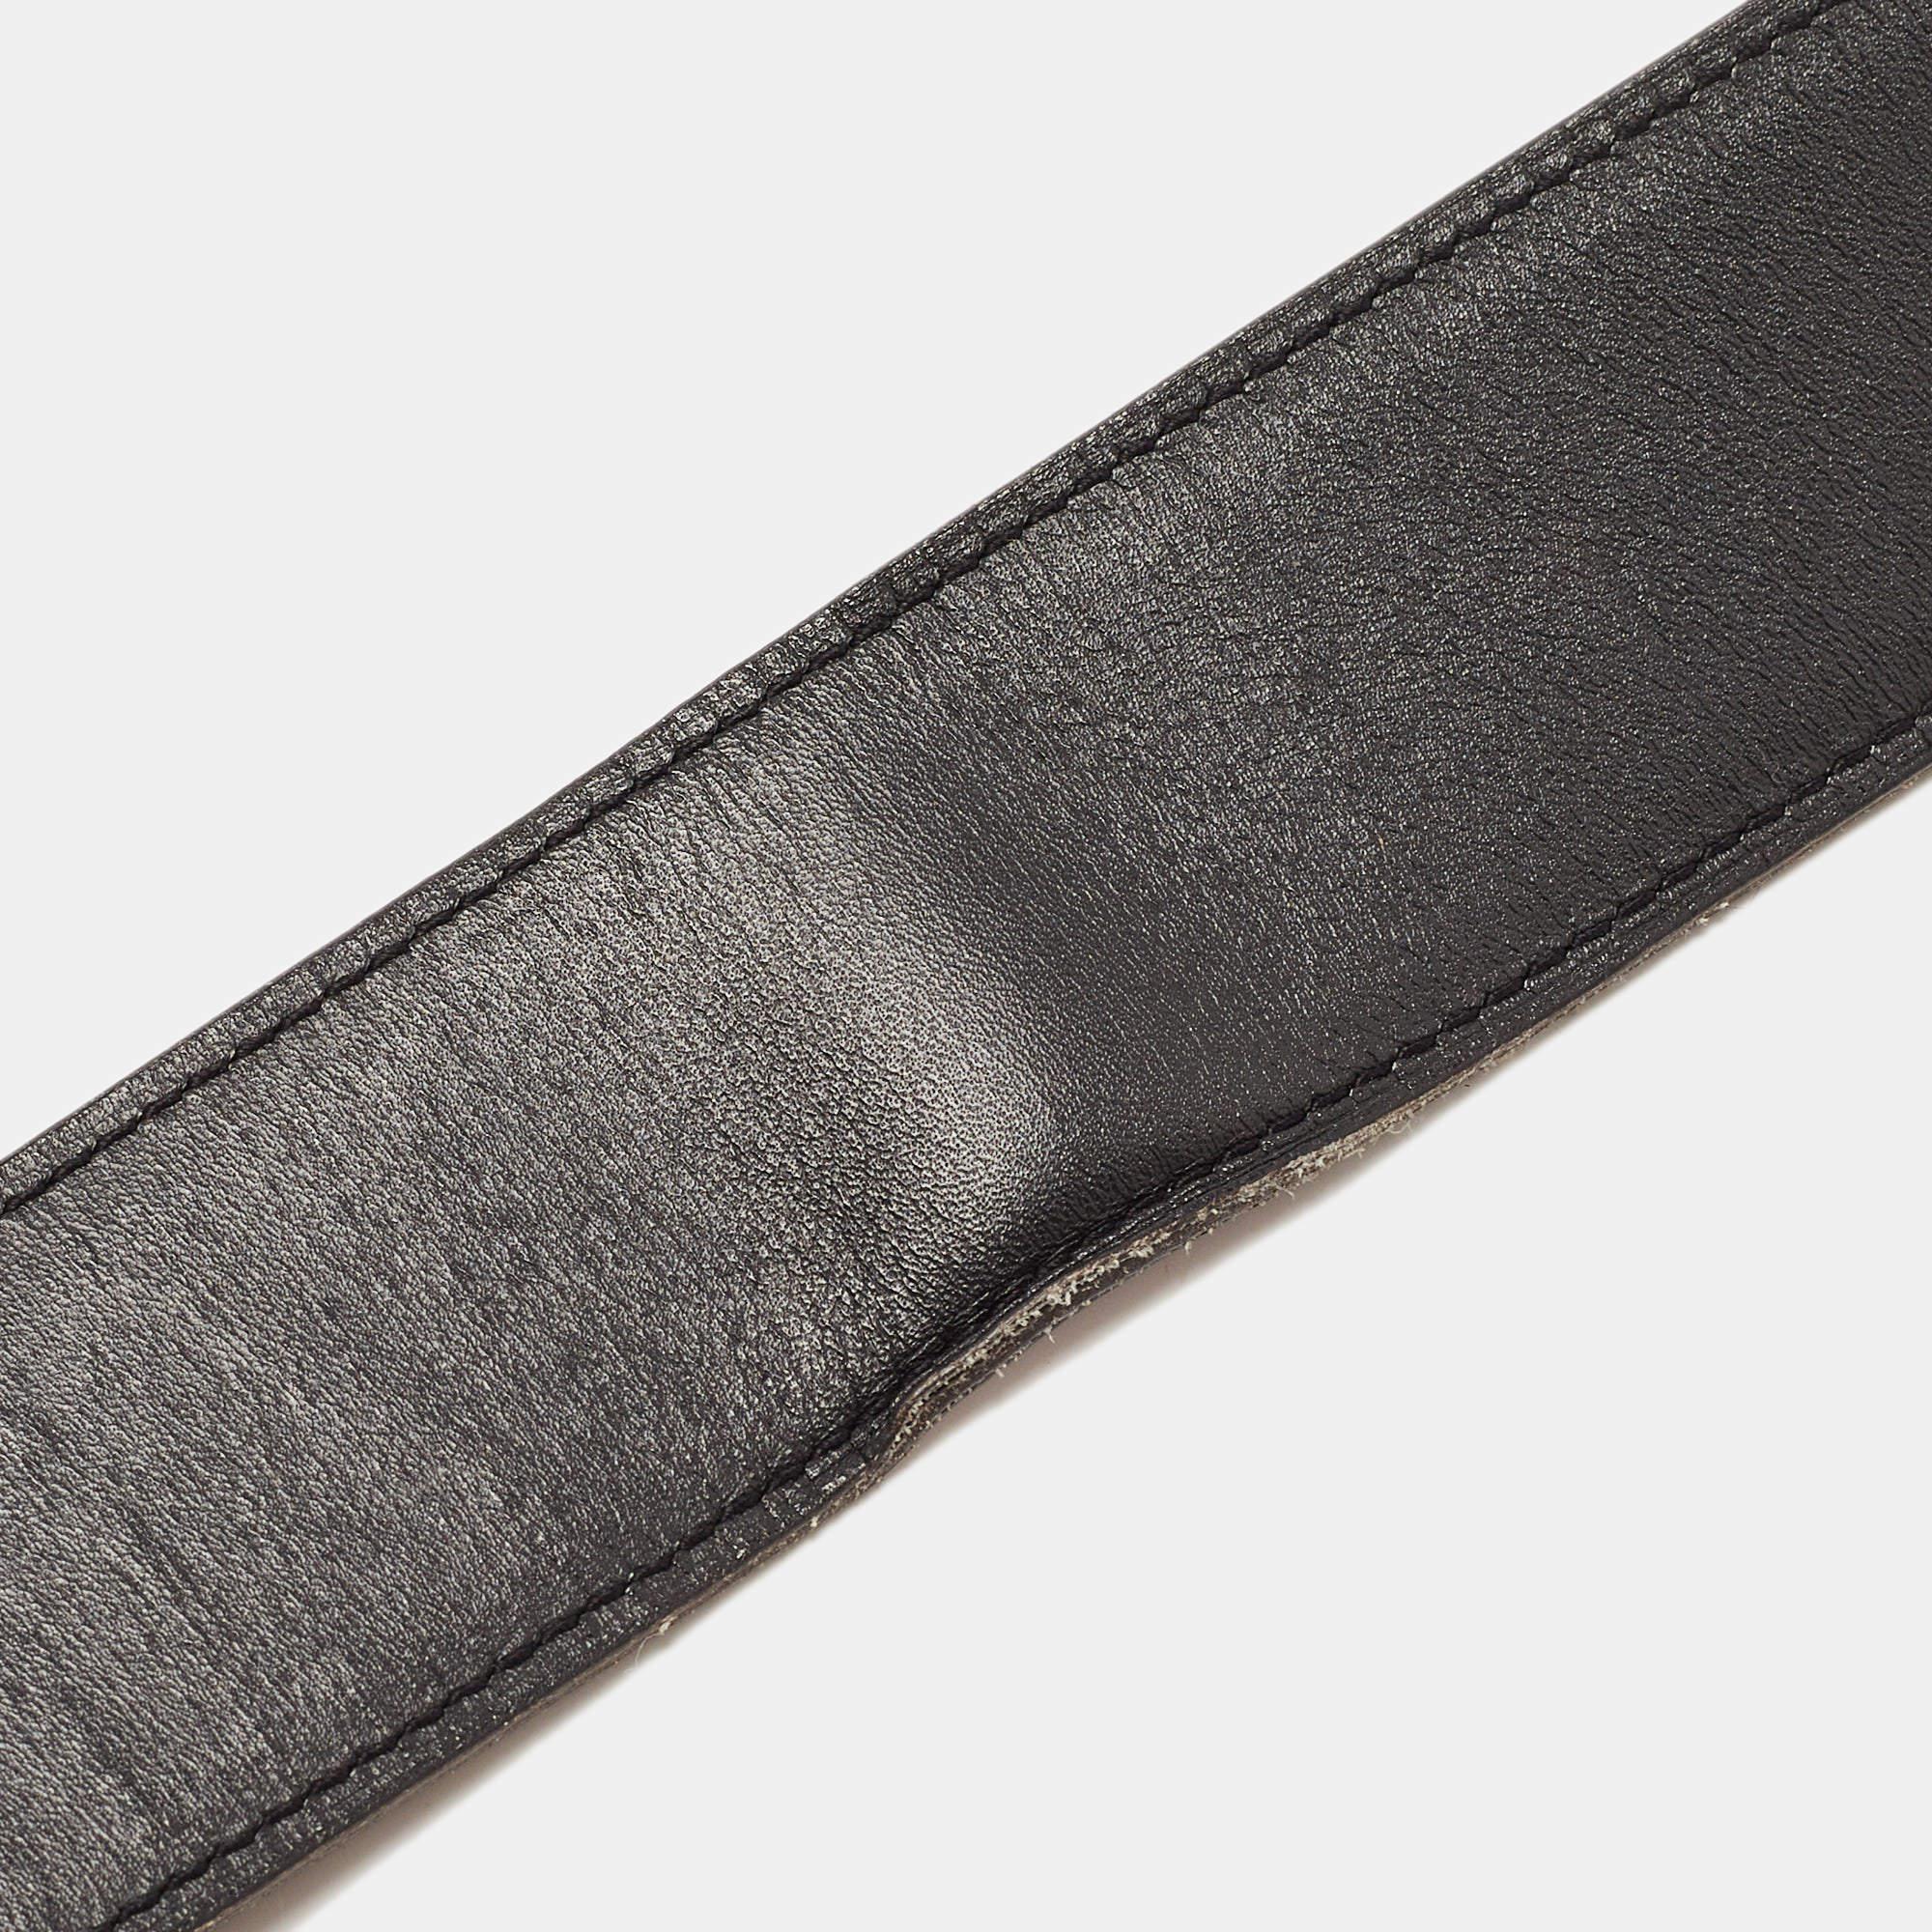 This Hermes reversible belt is crafted from leather. The classic piece has dual shades to match a variety of outfits. It is completed with a metal Medor buckle.

